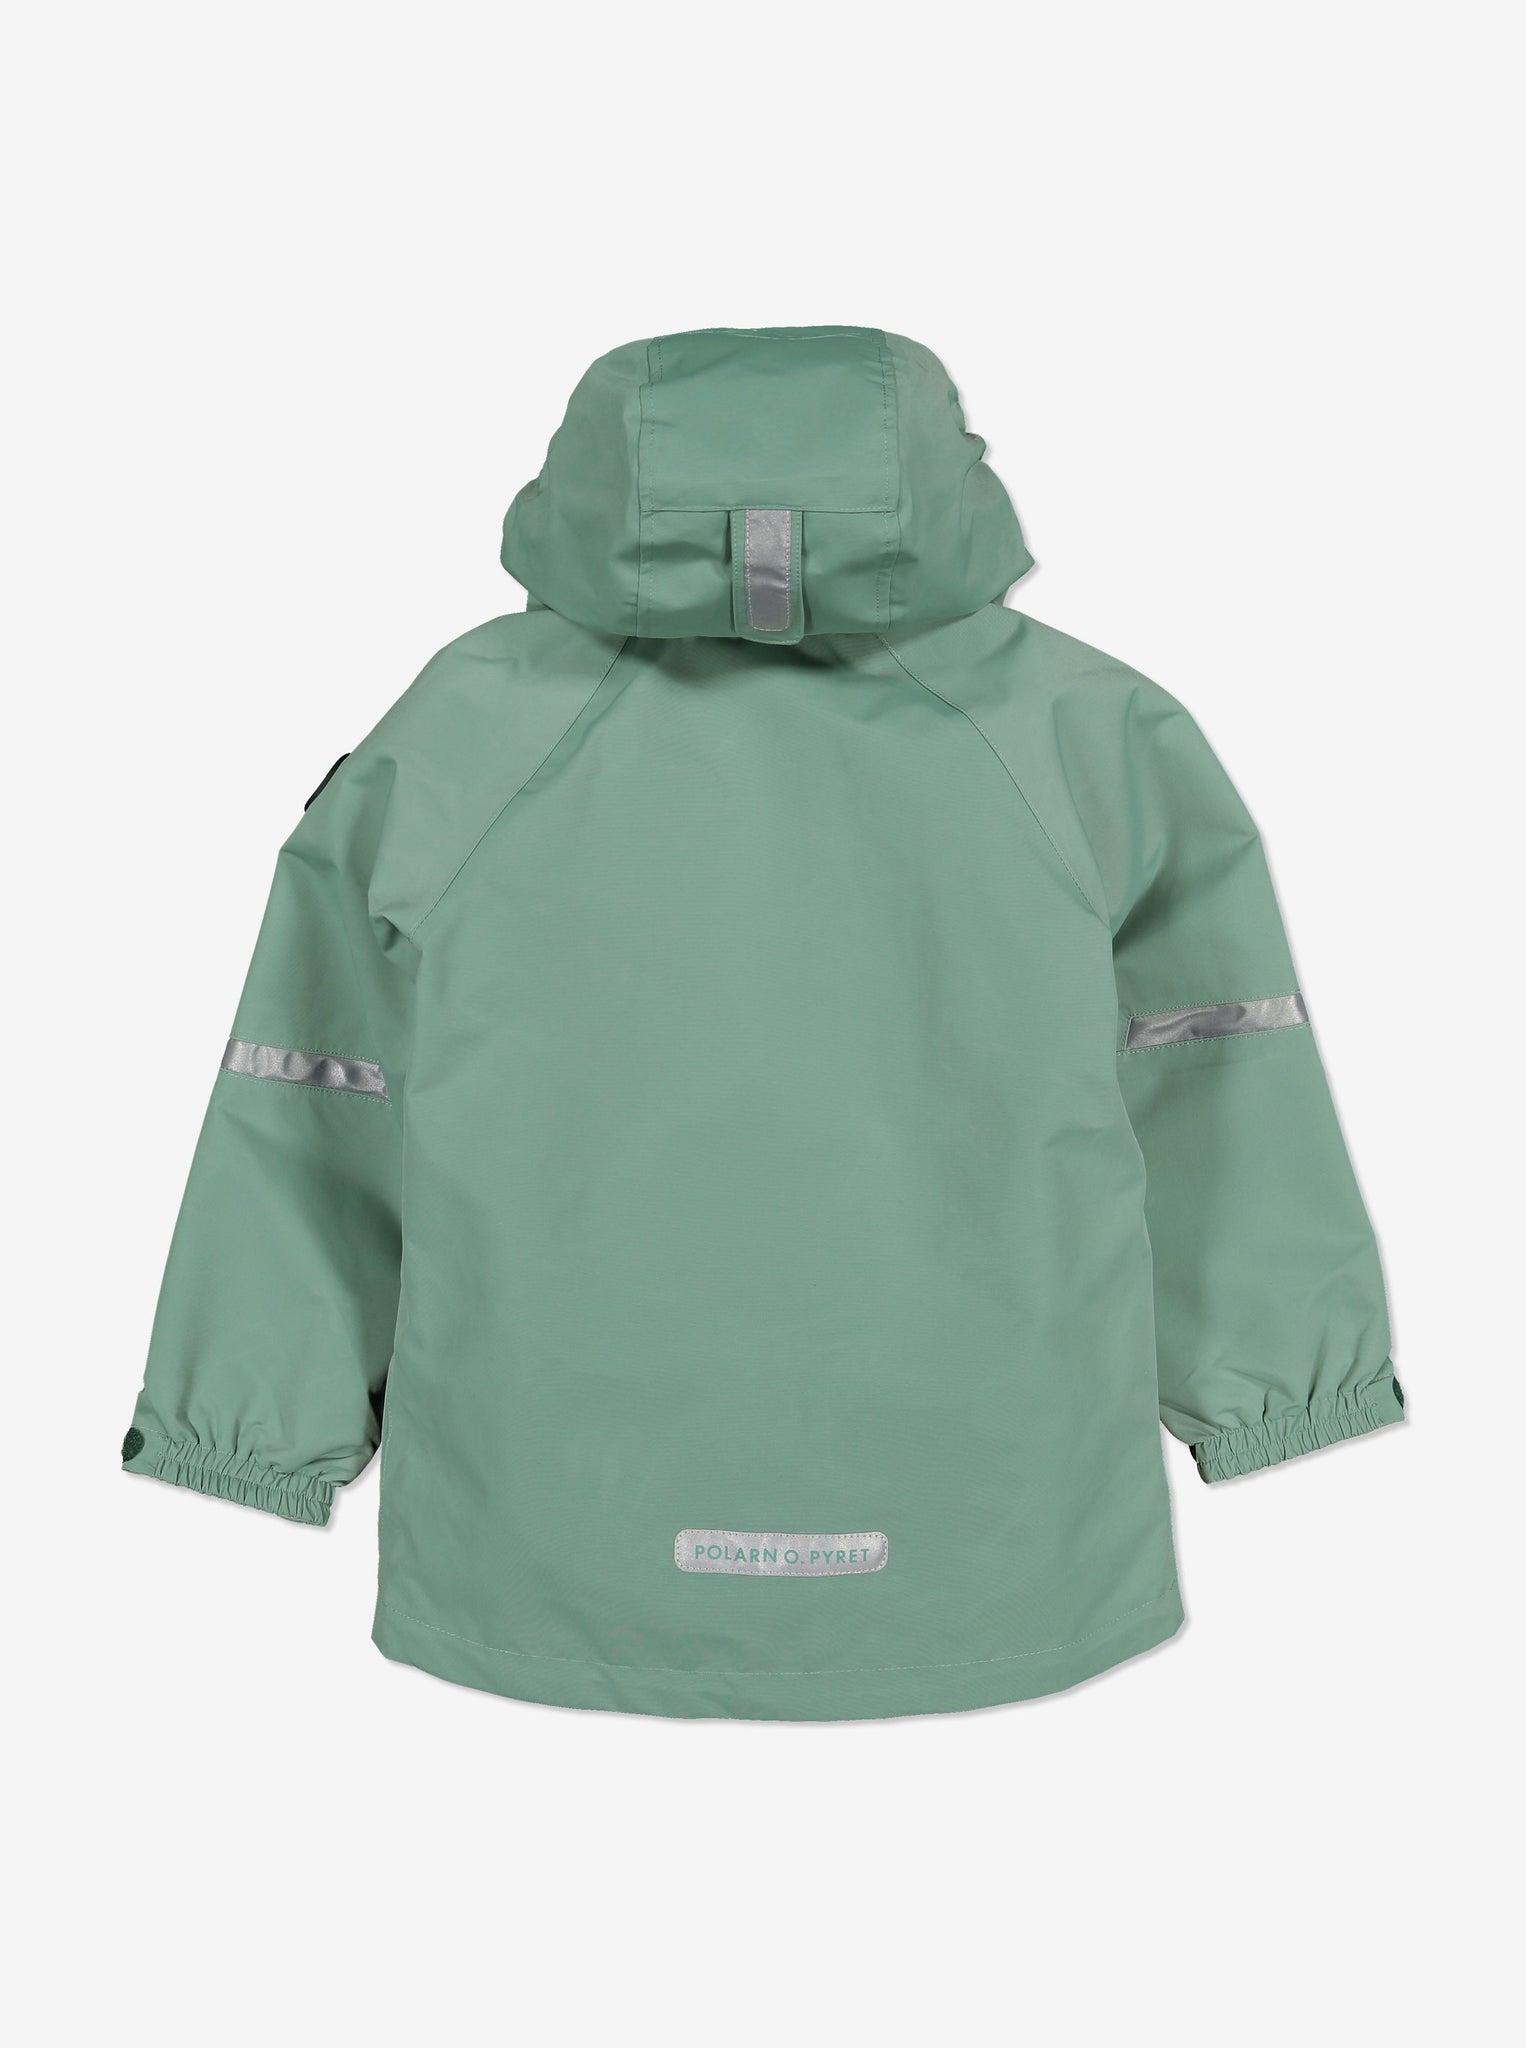 Back view of childrens waterproof jacket in colour green, comes with a detachable hood and silver reflectors.